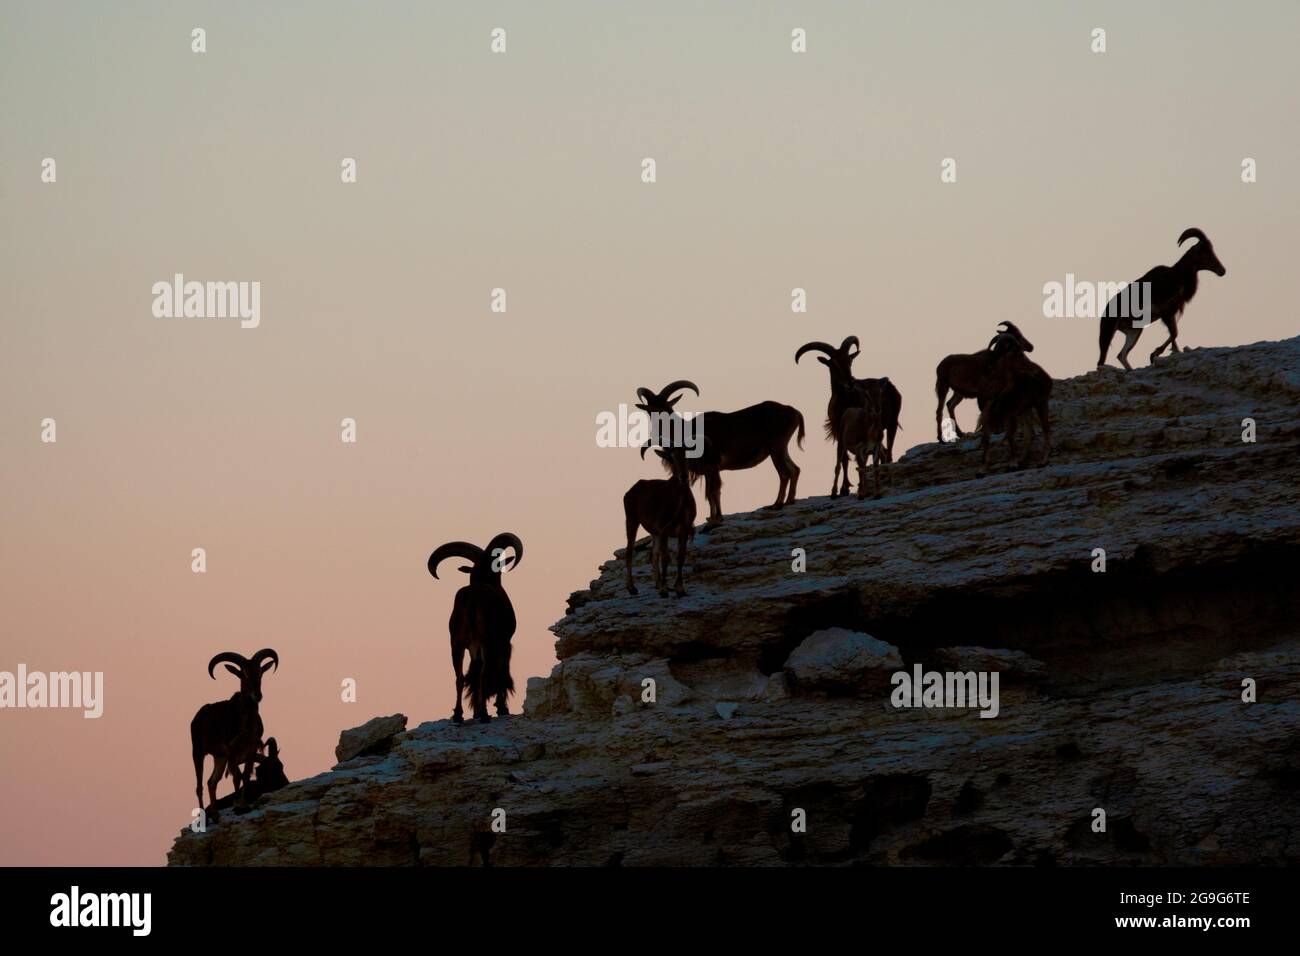 Alpine ibex silhouetted on a cliff at dusk Stock Photo